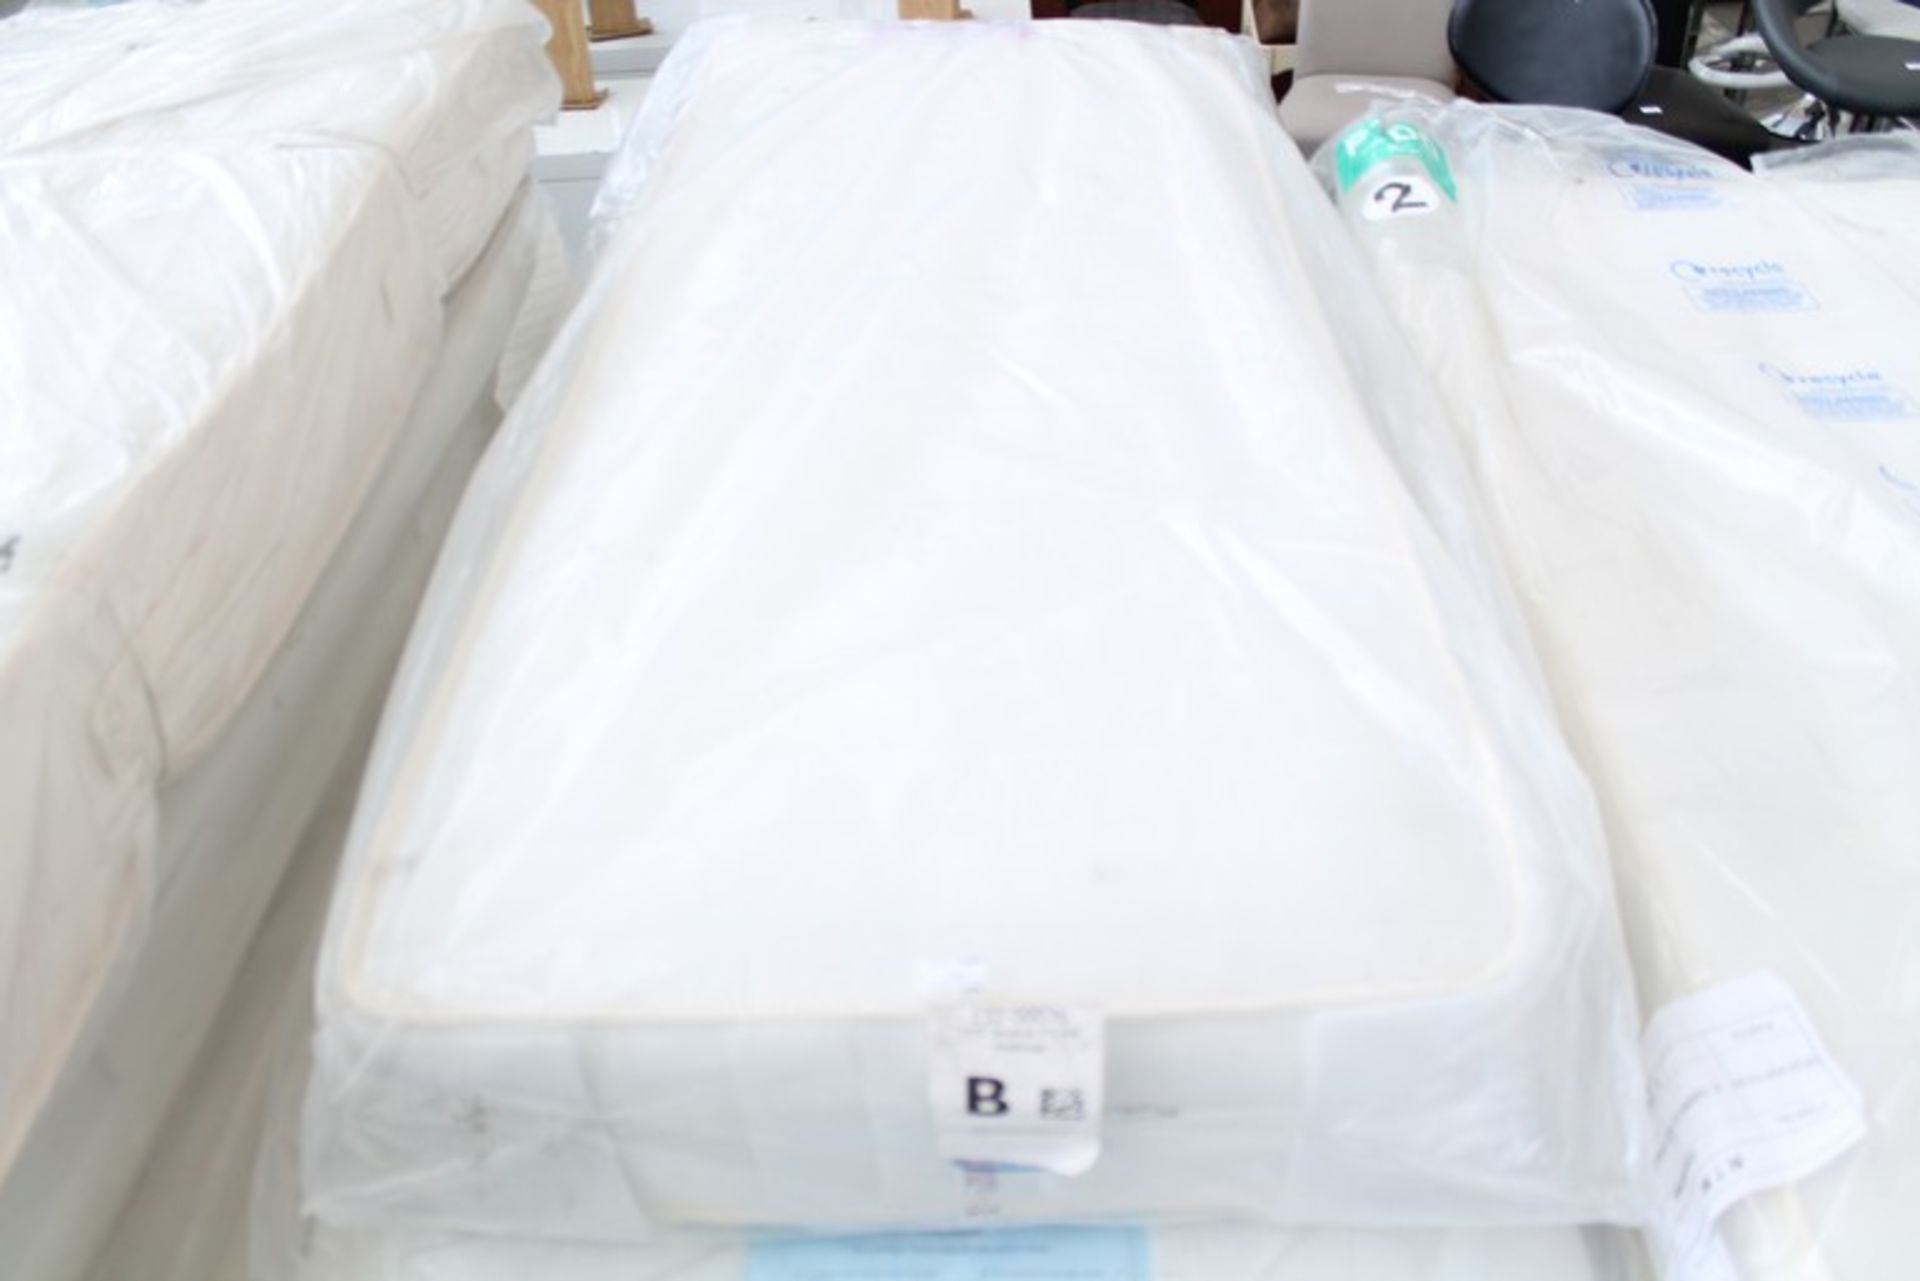 4 x ASSORTED 75x190CM SMALL SINGLE MATTRESSES   *PLEASE NOTE THAT THE BID PRICE IS MULTIPLIED BY THE